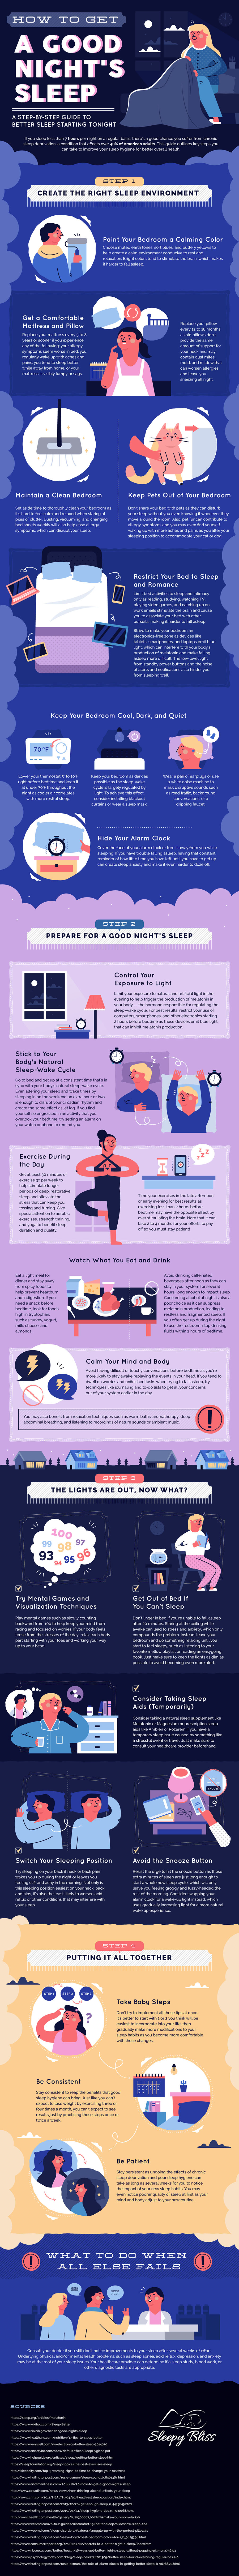 Infographic for How to Get a Good Night's Sleep